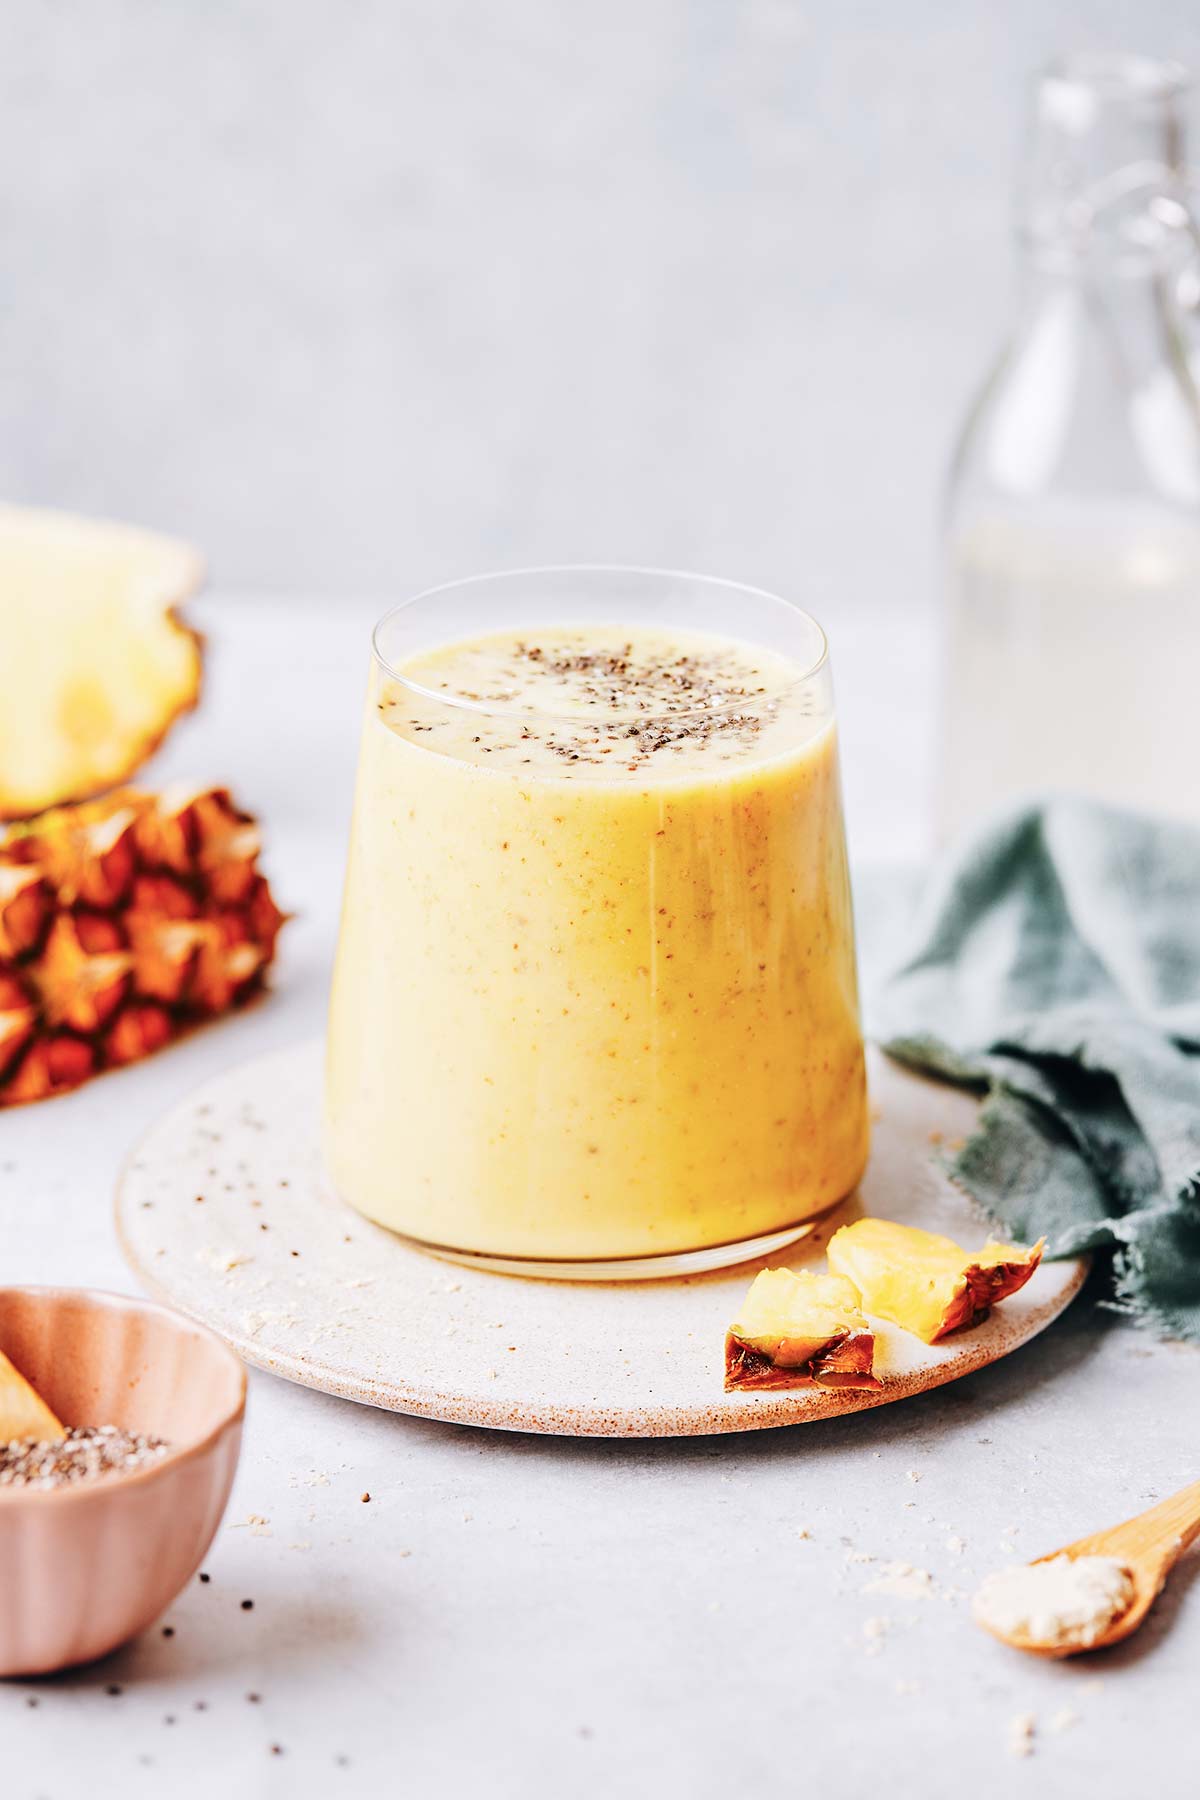 Weight loss: 5 delicious smoothie recipes to get rid of belly fat fast